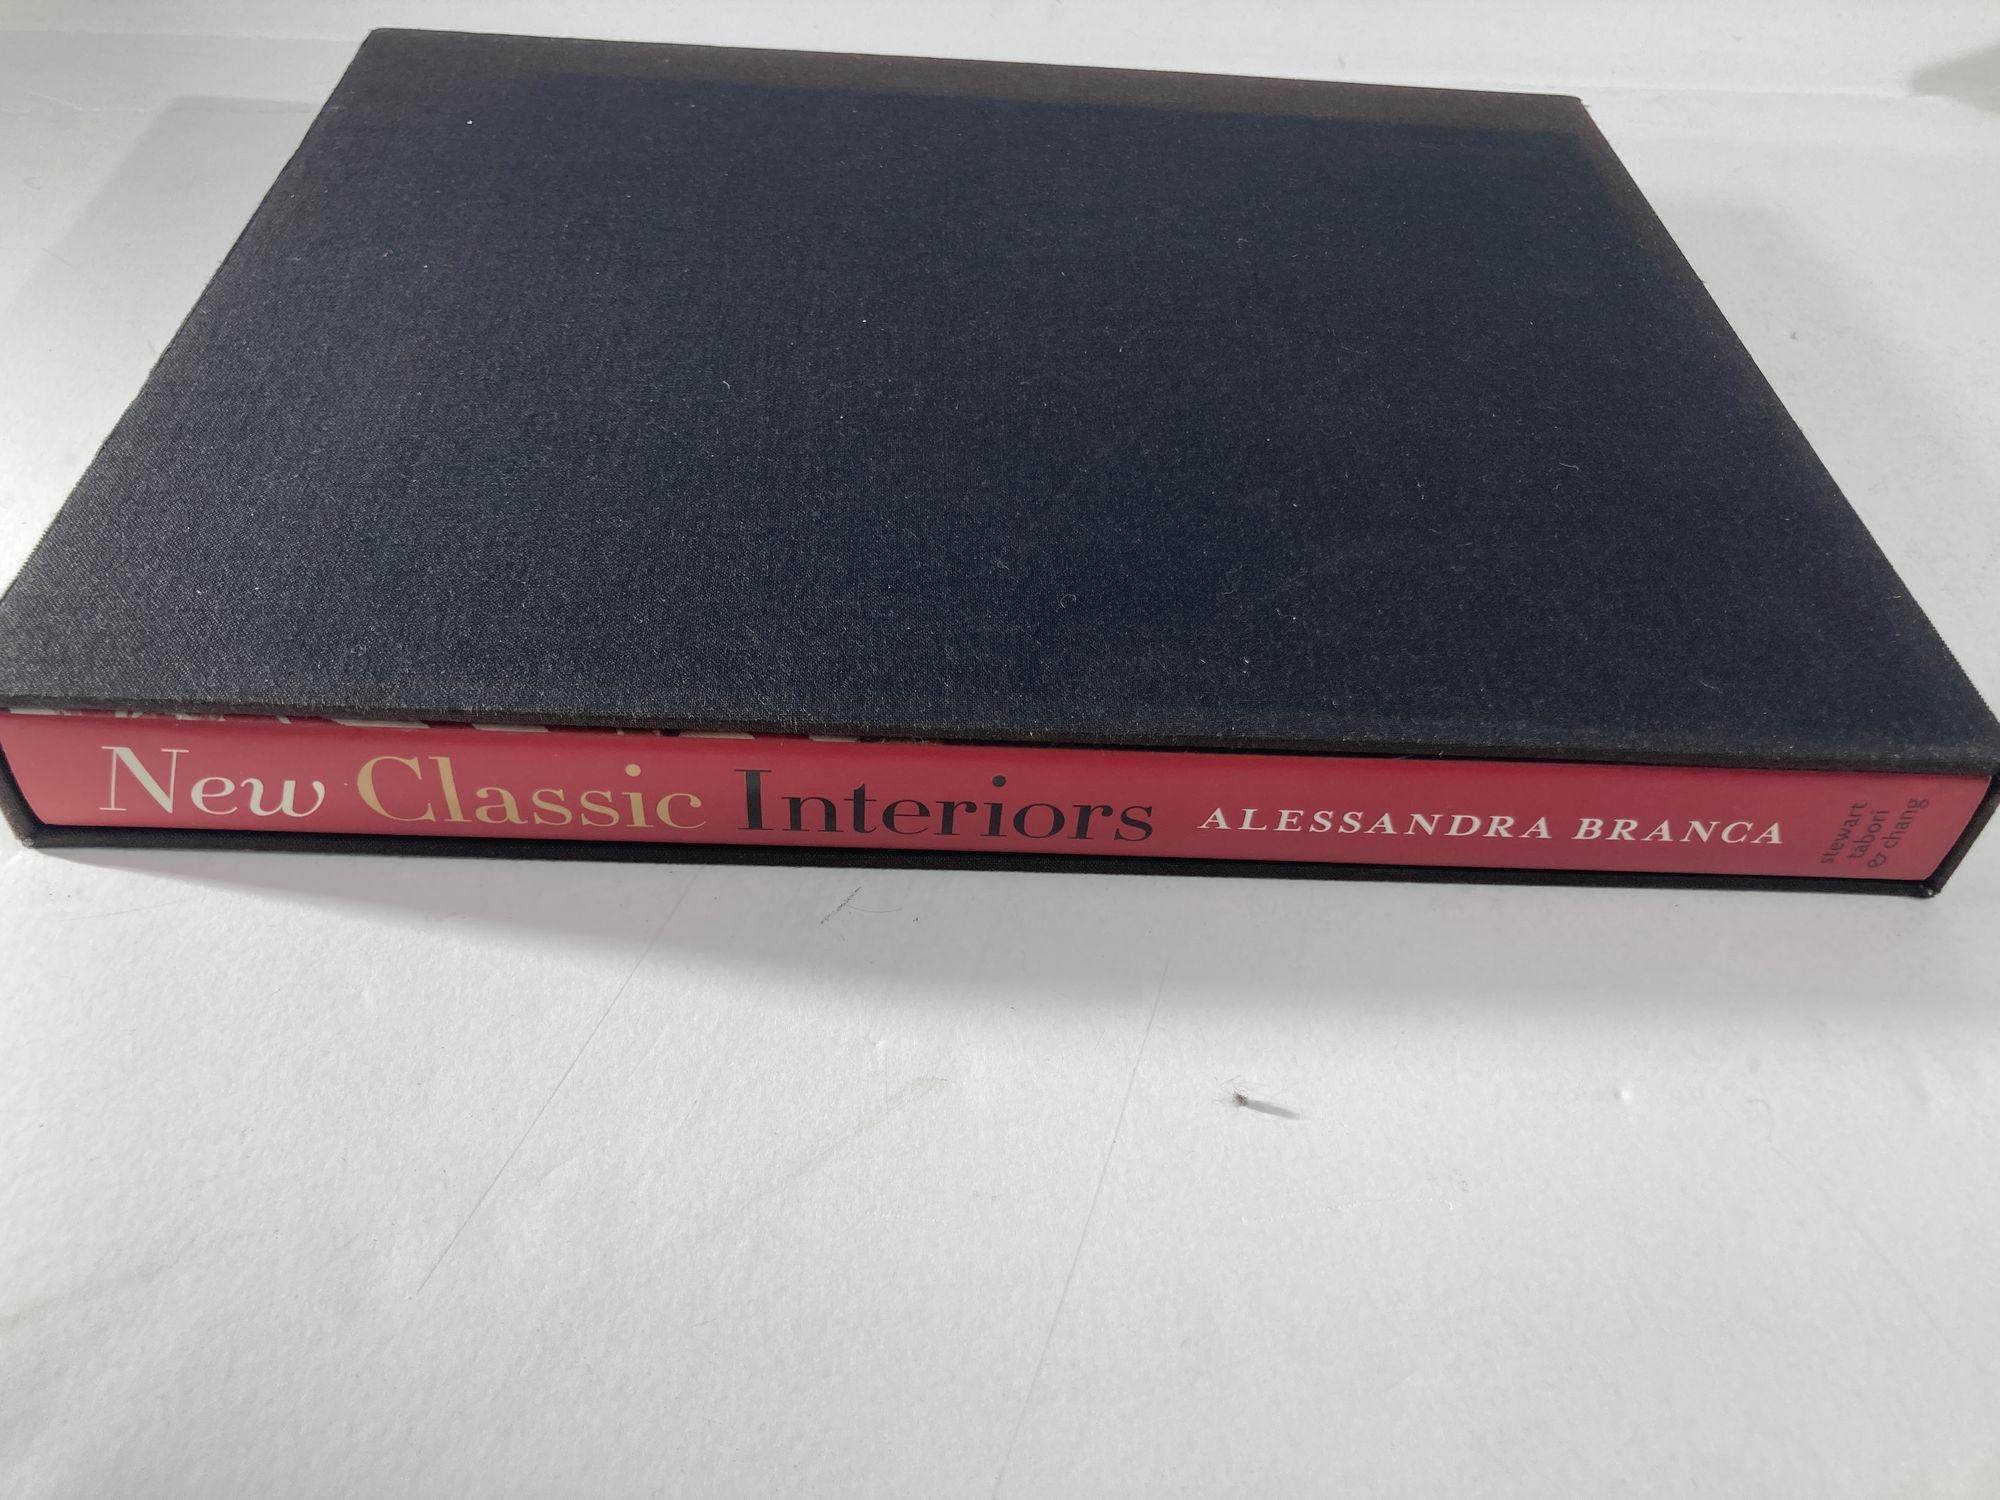 New Classic Interiors by Alessandra Branca Hardcover Coffee Table Book For Sale 10